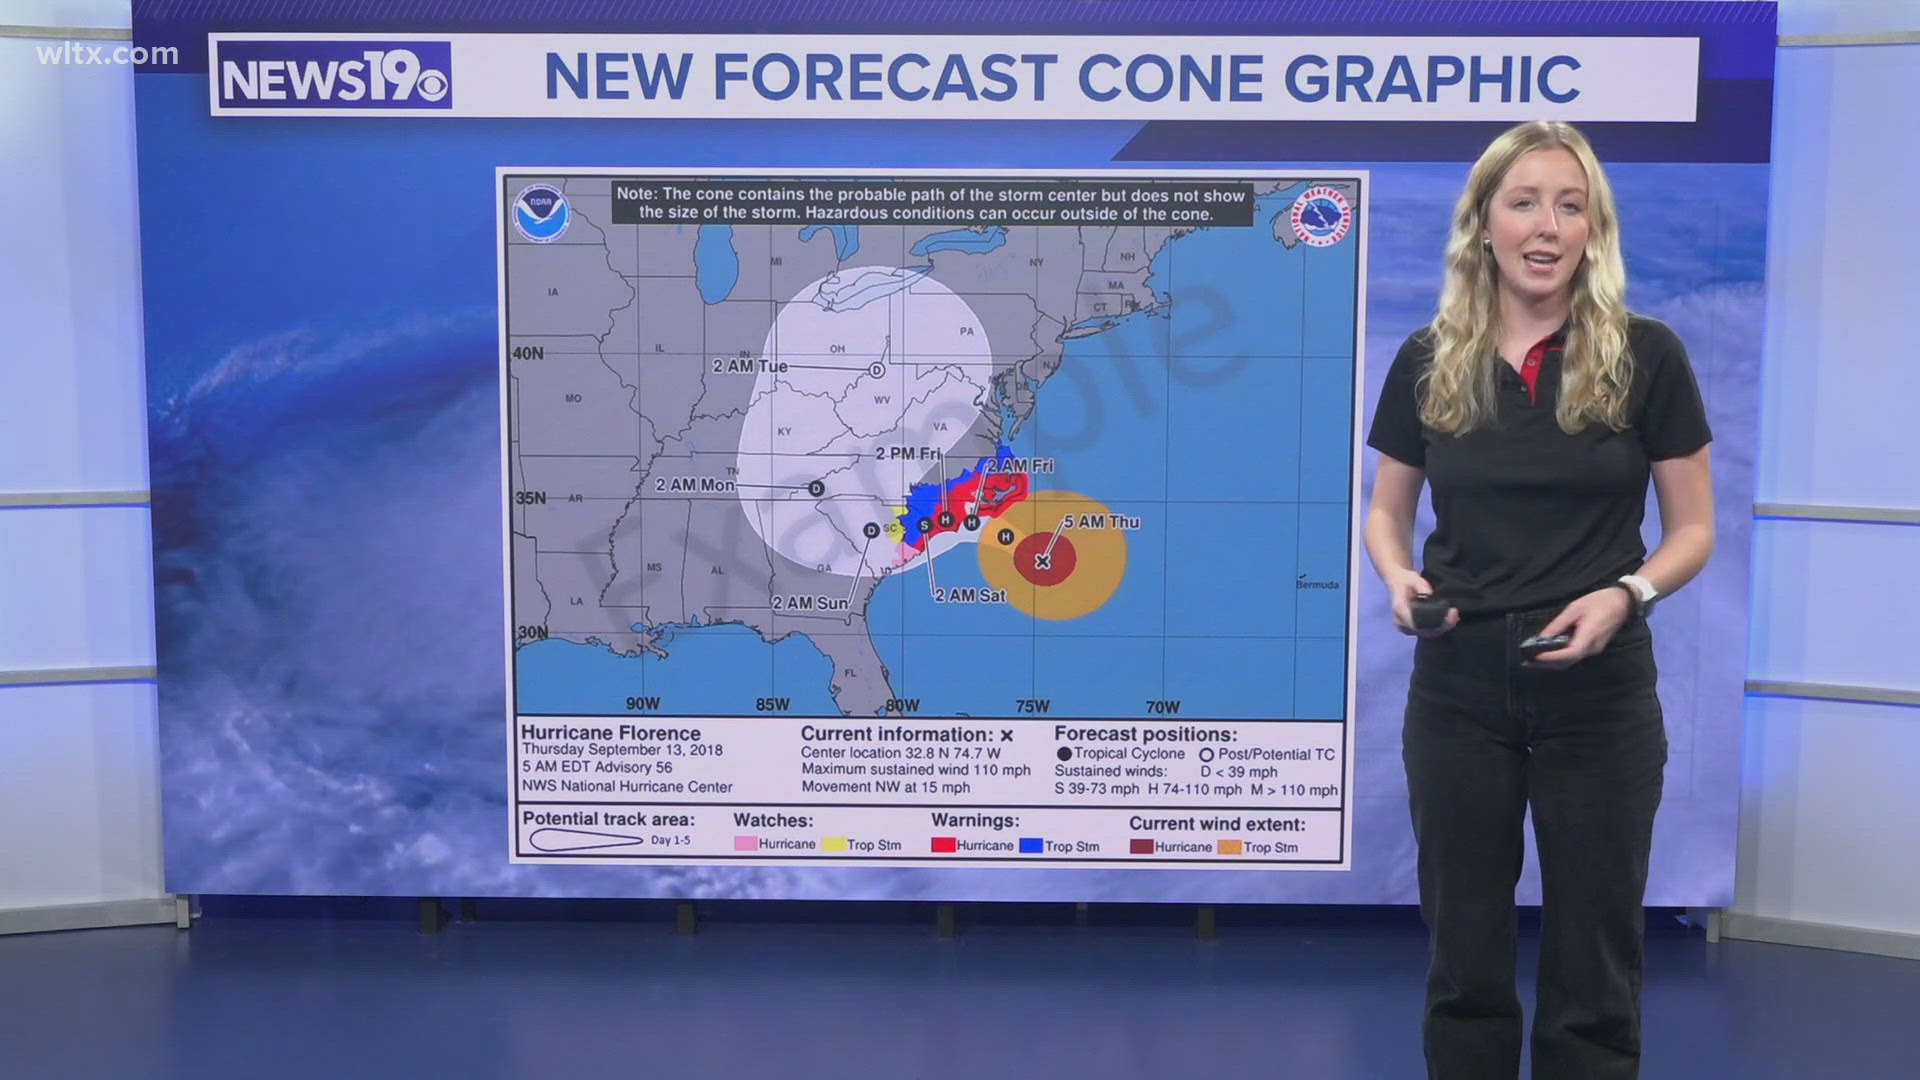 This year around August 15th, the National Hurricane Center, or NHC, will begin issuing experimental versions of the well-known forecast cone graphic.